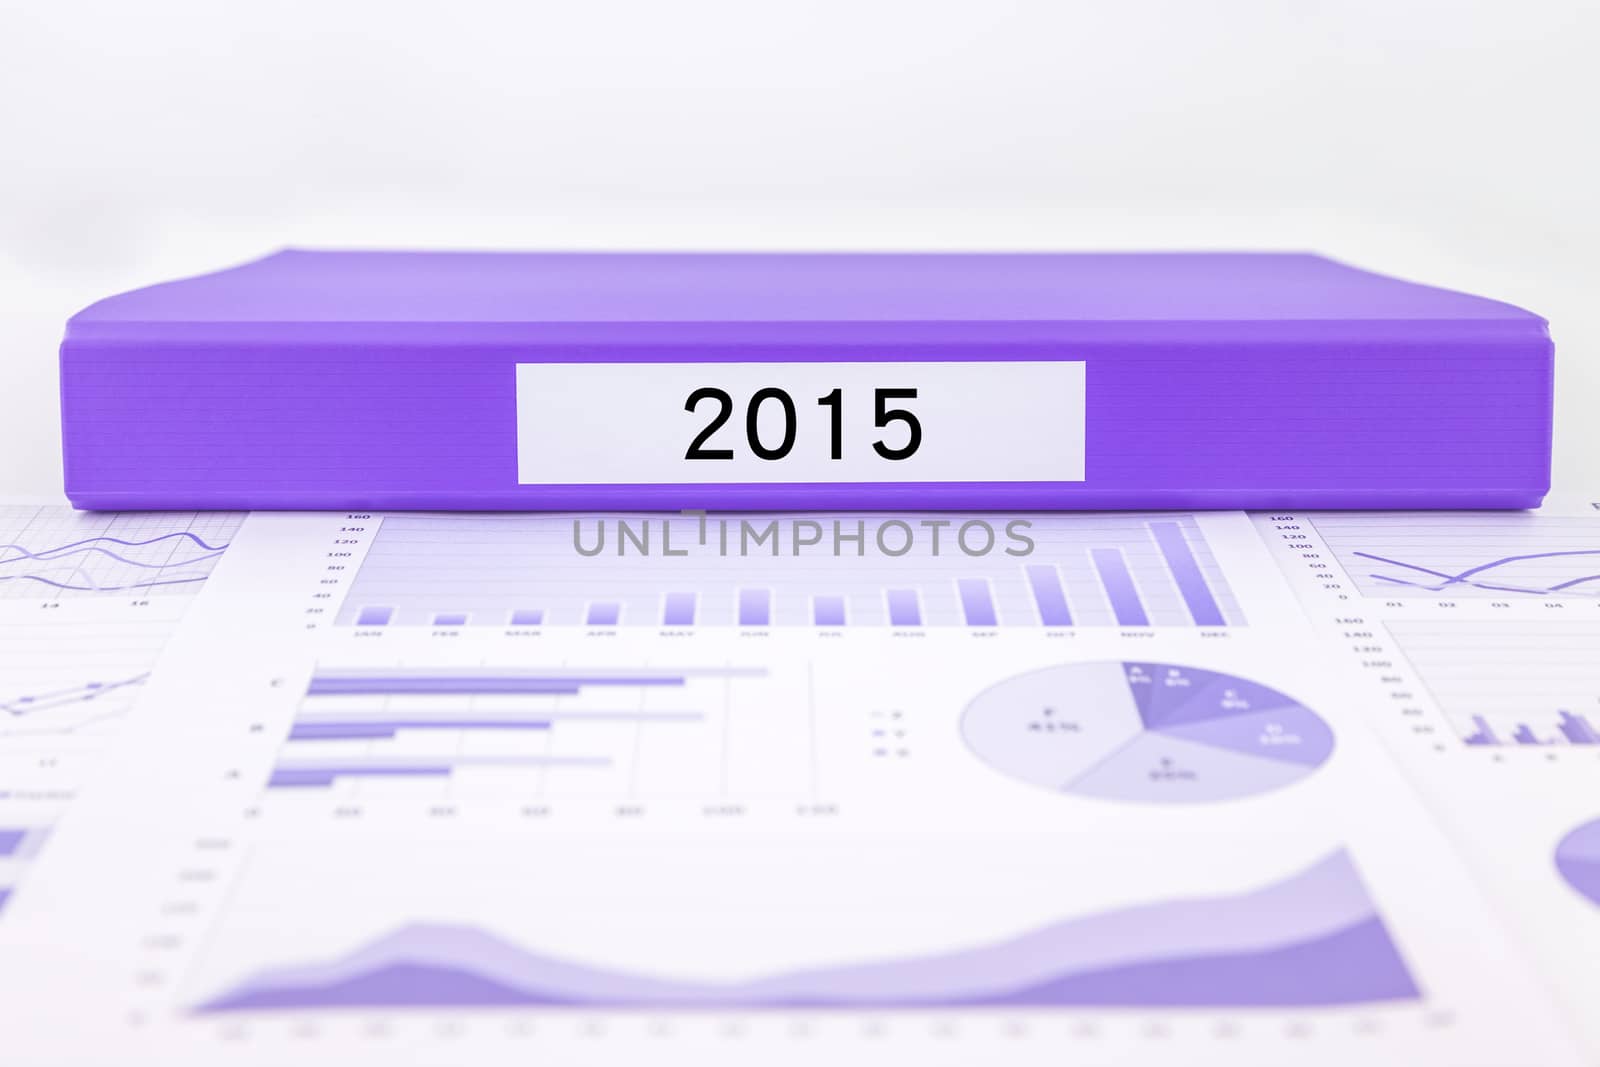 Year number 2015, graphs, charts and market trend reports by vinnstock